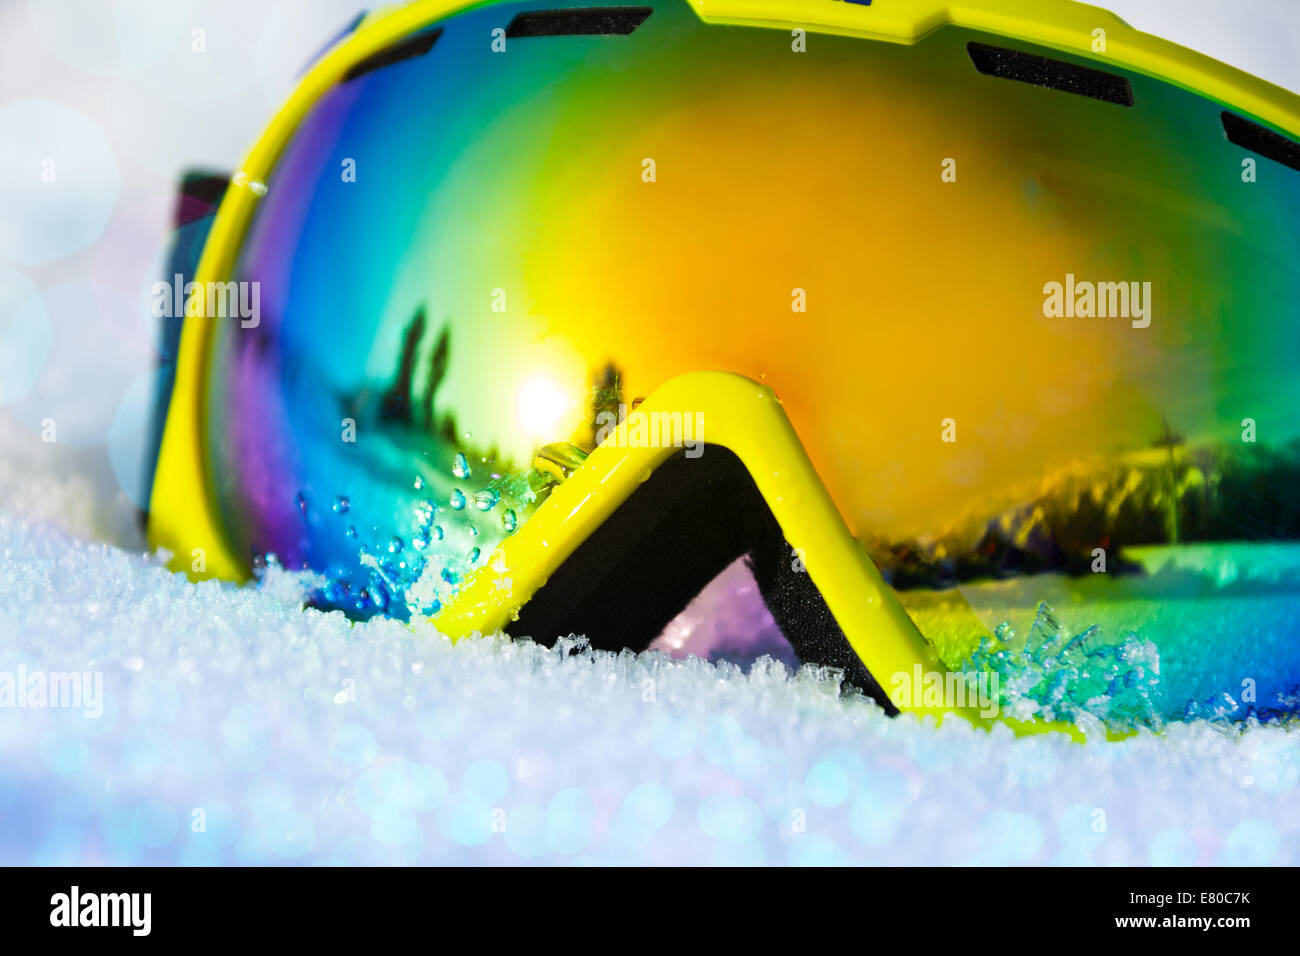 Close up view of ski mask on snow with snowflakes Stock Photo